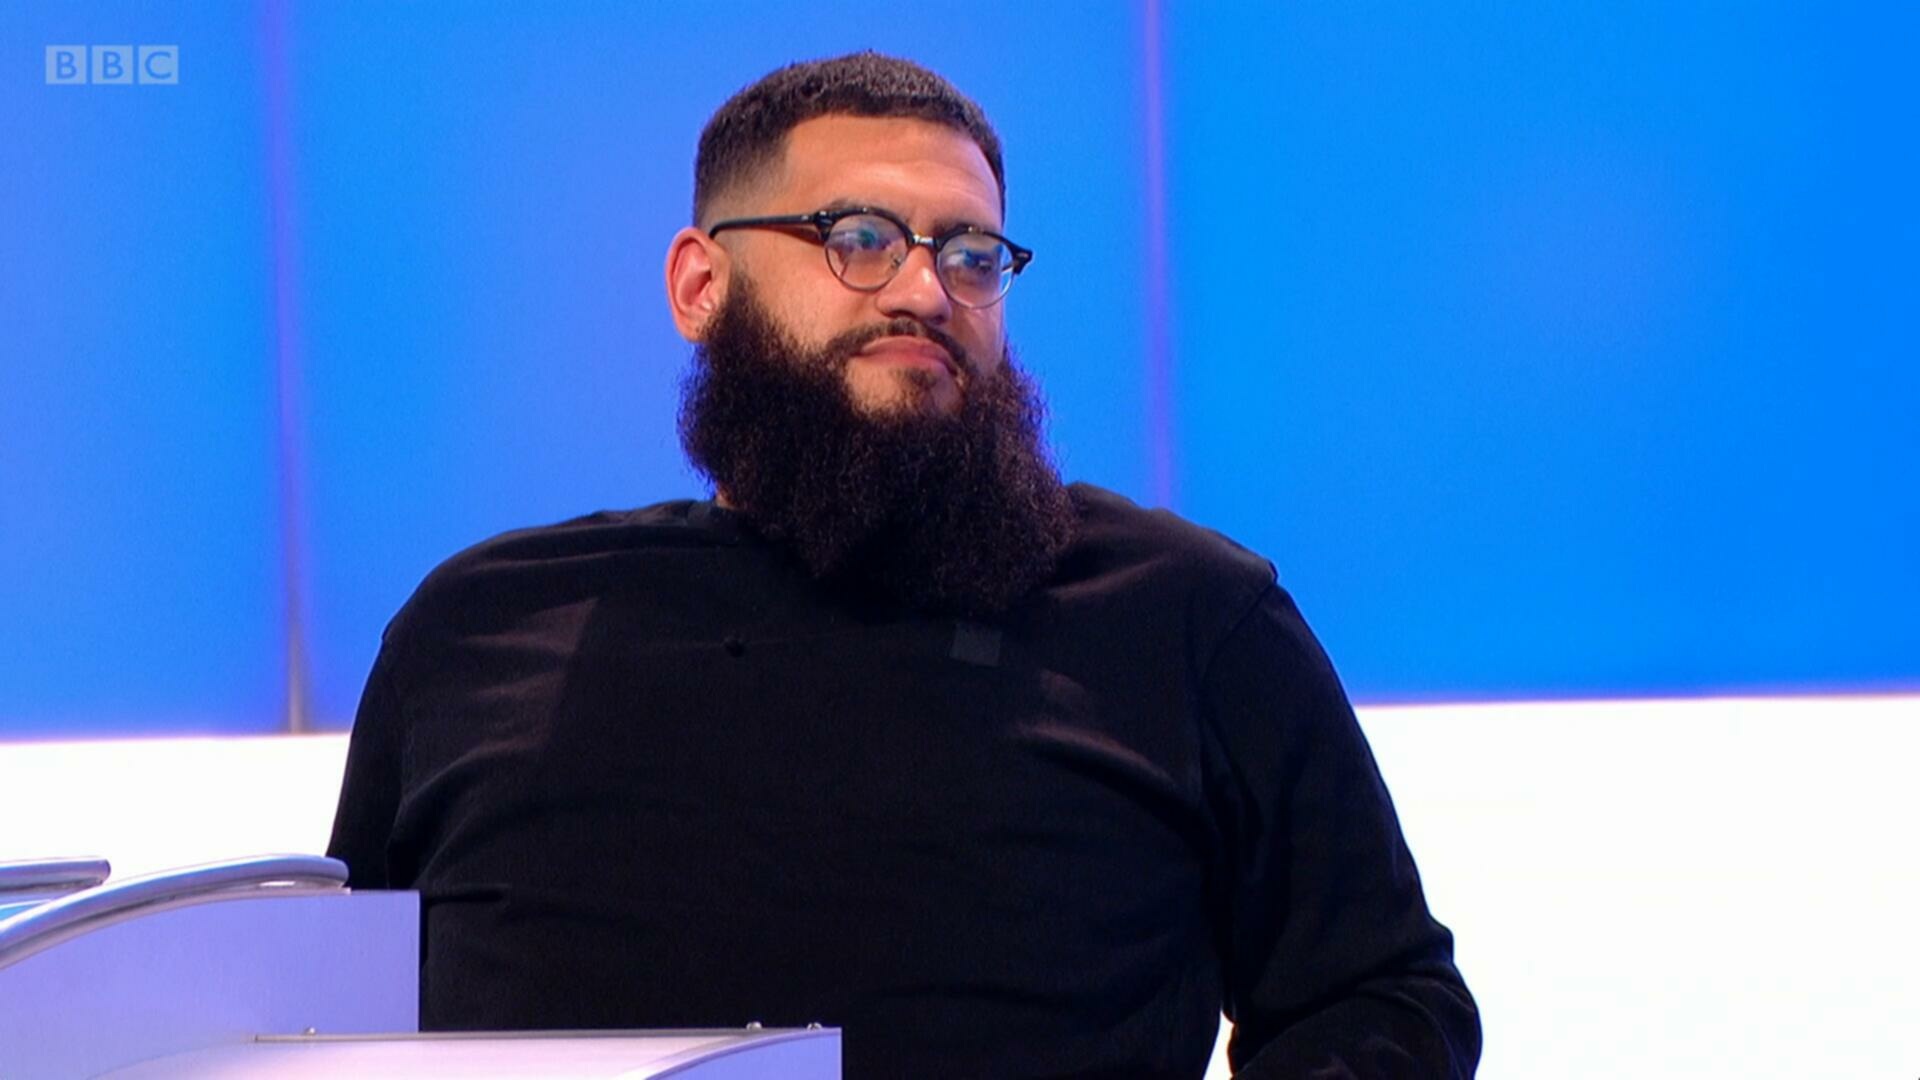 Would I Lie to You S15E07 Victoria Derbyshire Rhod Gilbert Rosie Jones and Jamali Maddix 1080p WEB D